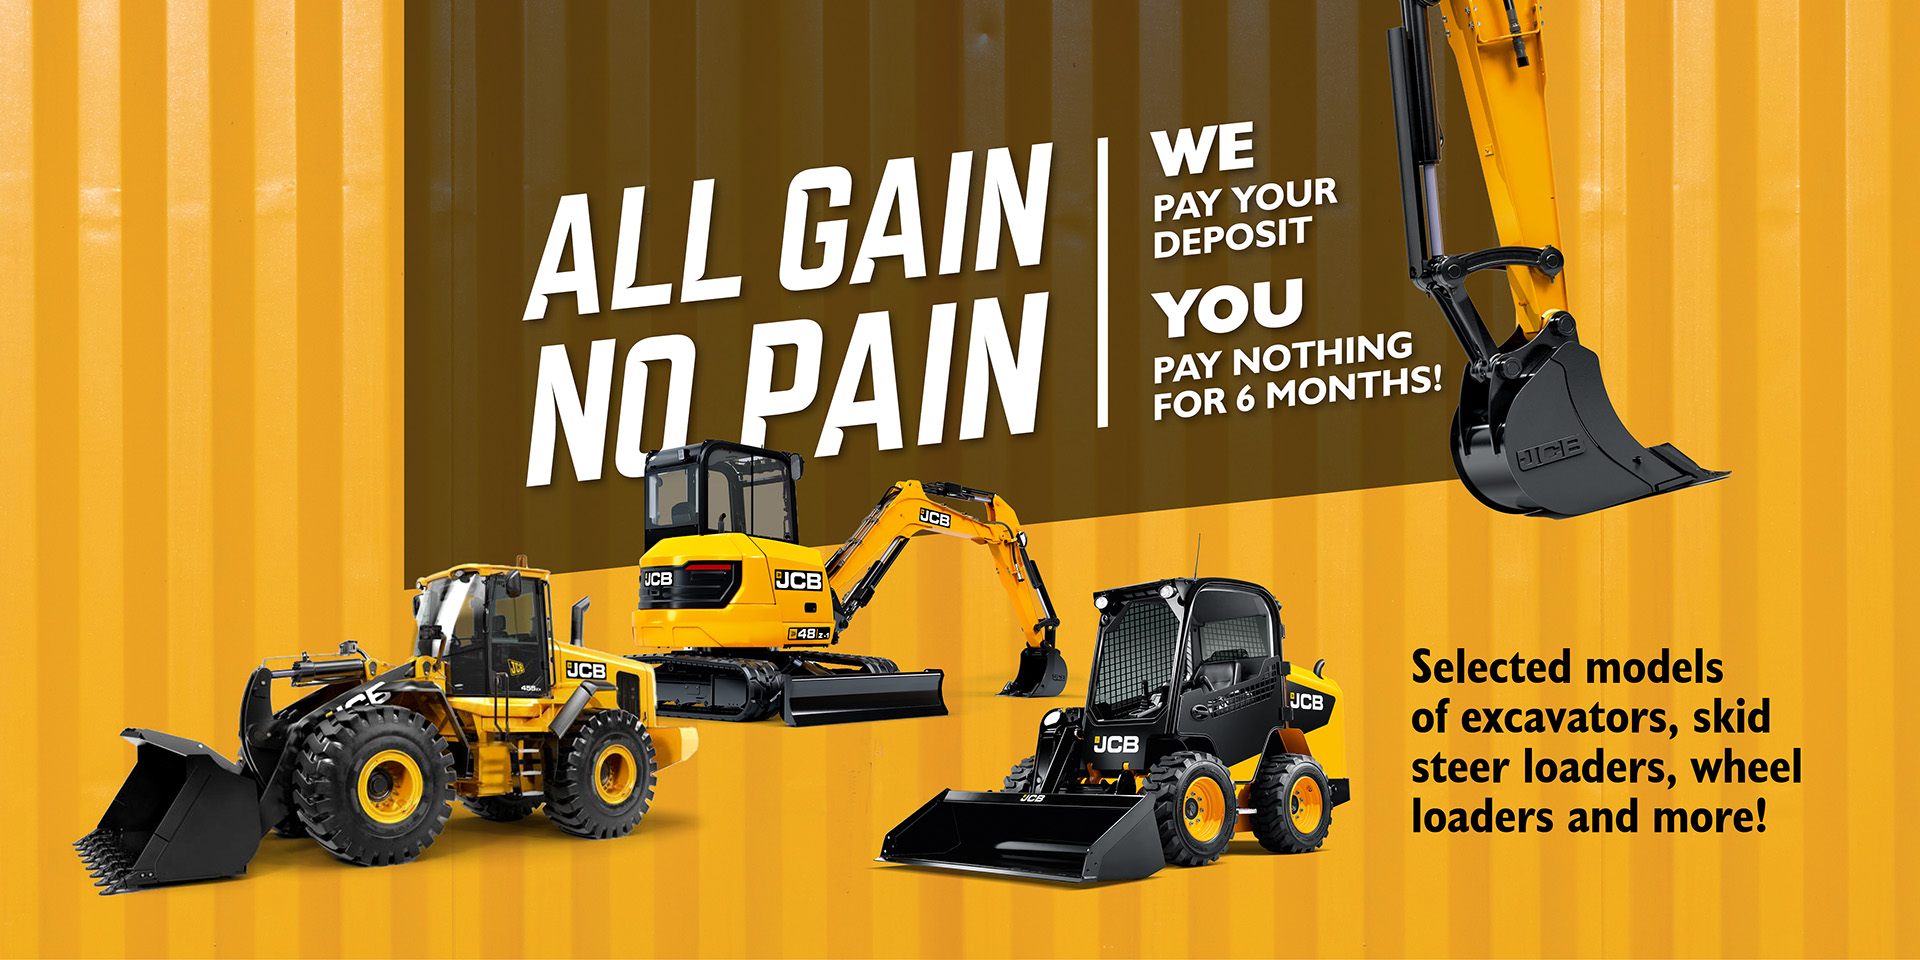 All gain, no pain. We pay your deposit, you pay nothing for 6 months. Selected models of excavators, skid steer loaders, wheel loaders, and more!